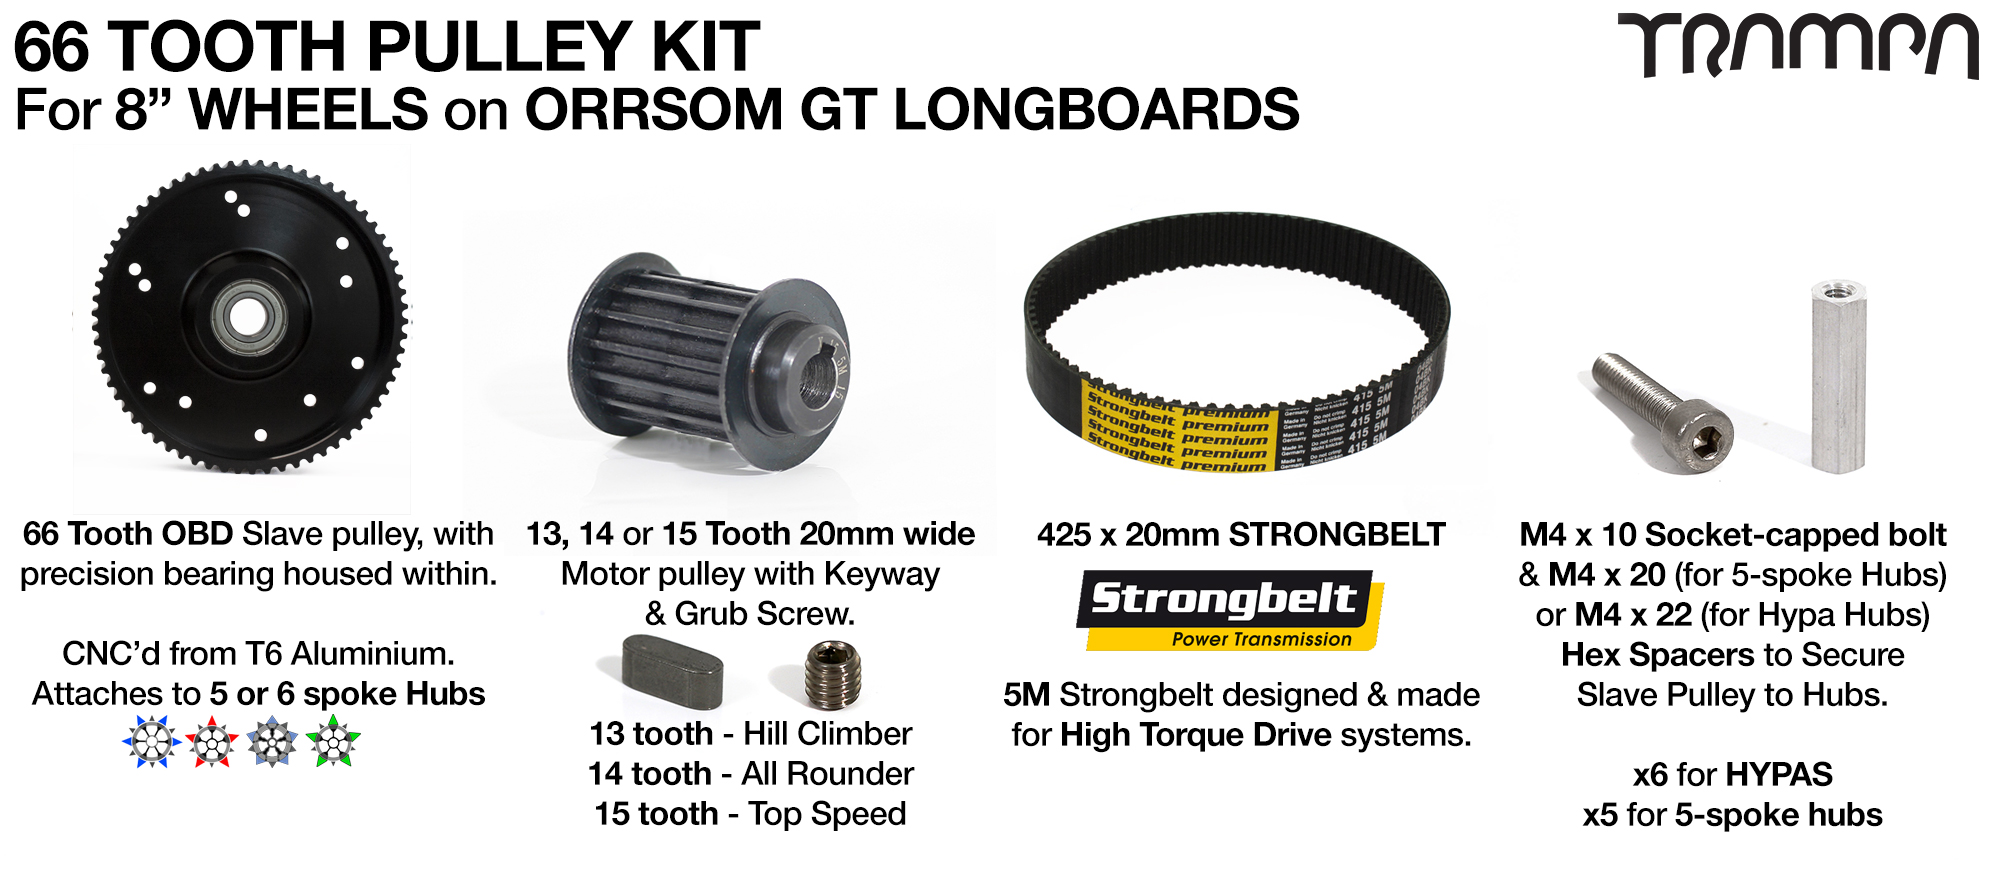 TRAMPA ORRSOM GT Longboard Pulley kit with 66 Tooth Slave & 425mm x 20mm Belt to fit 8 & 9 Inch Wheels on to 14FiFties Trucks